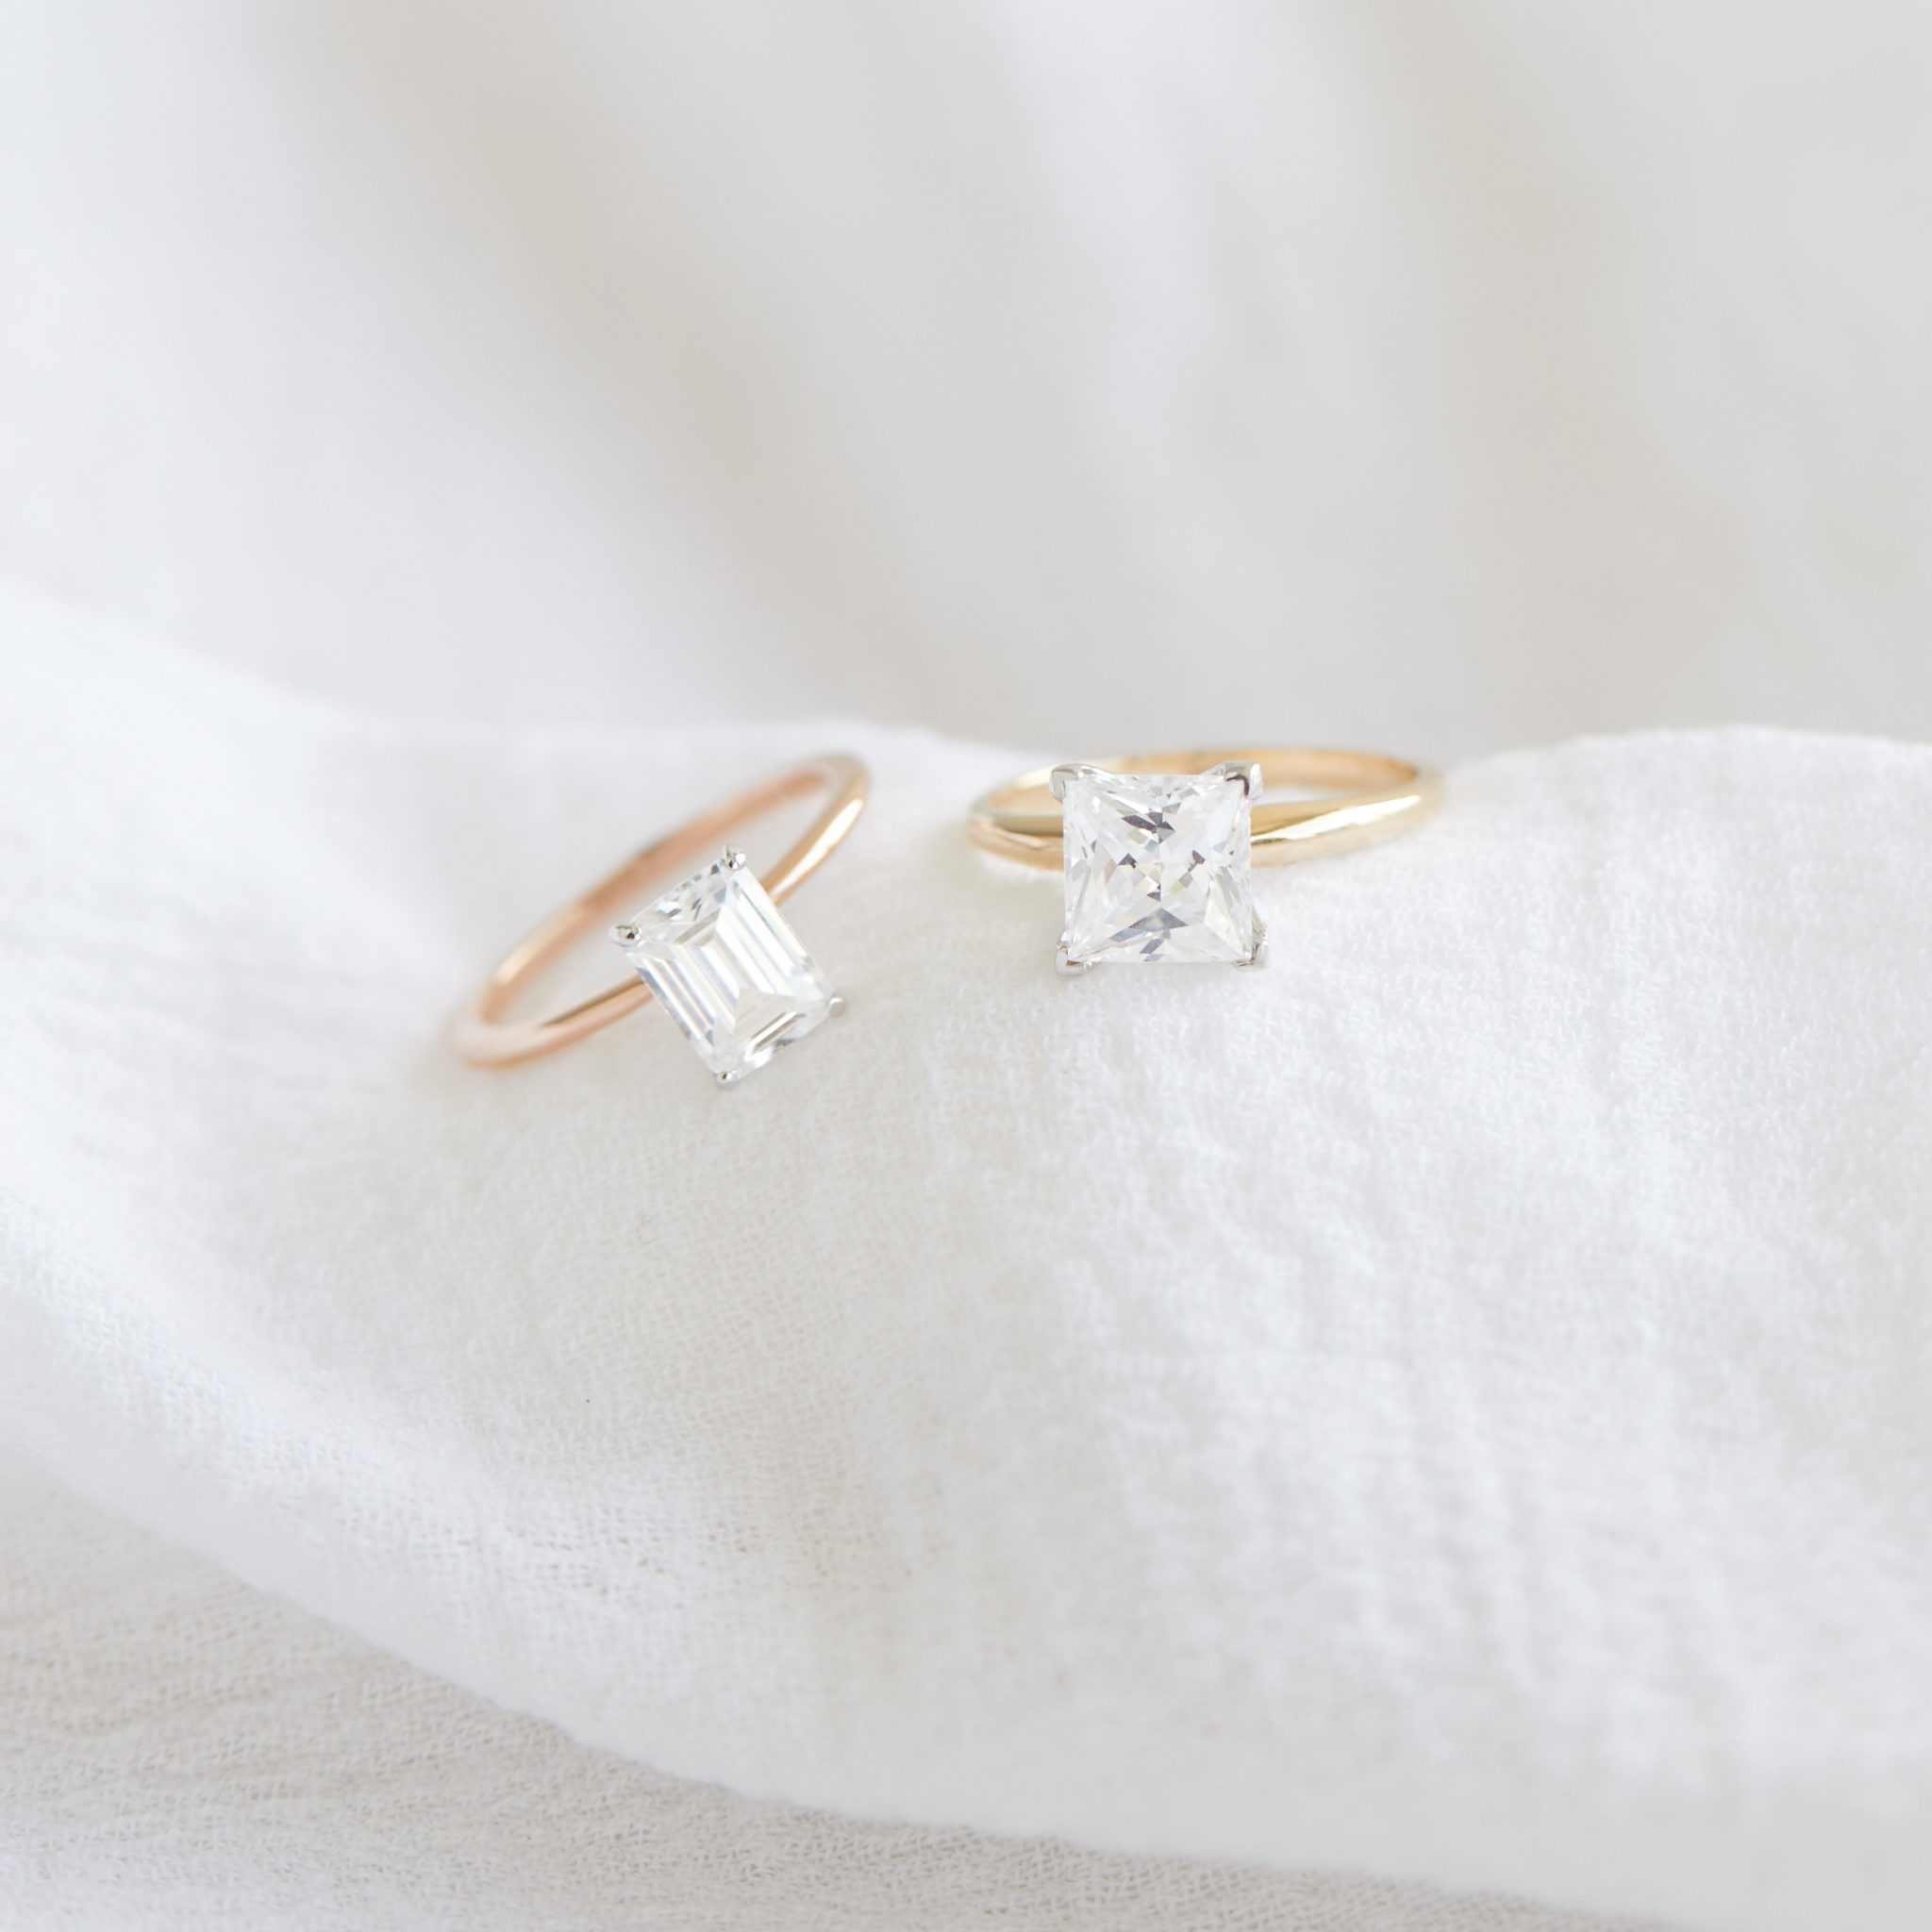 Everything You Need to Know When Engagement Ring Shopping